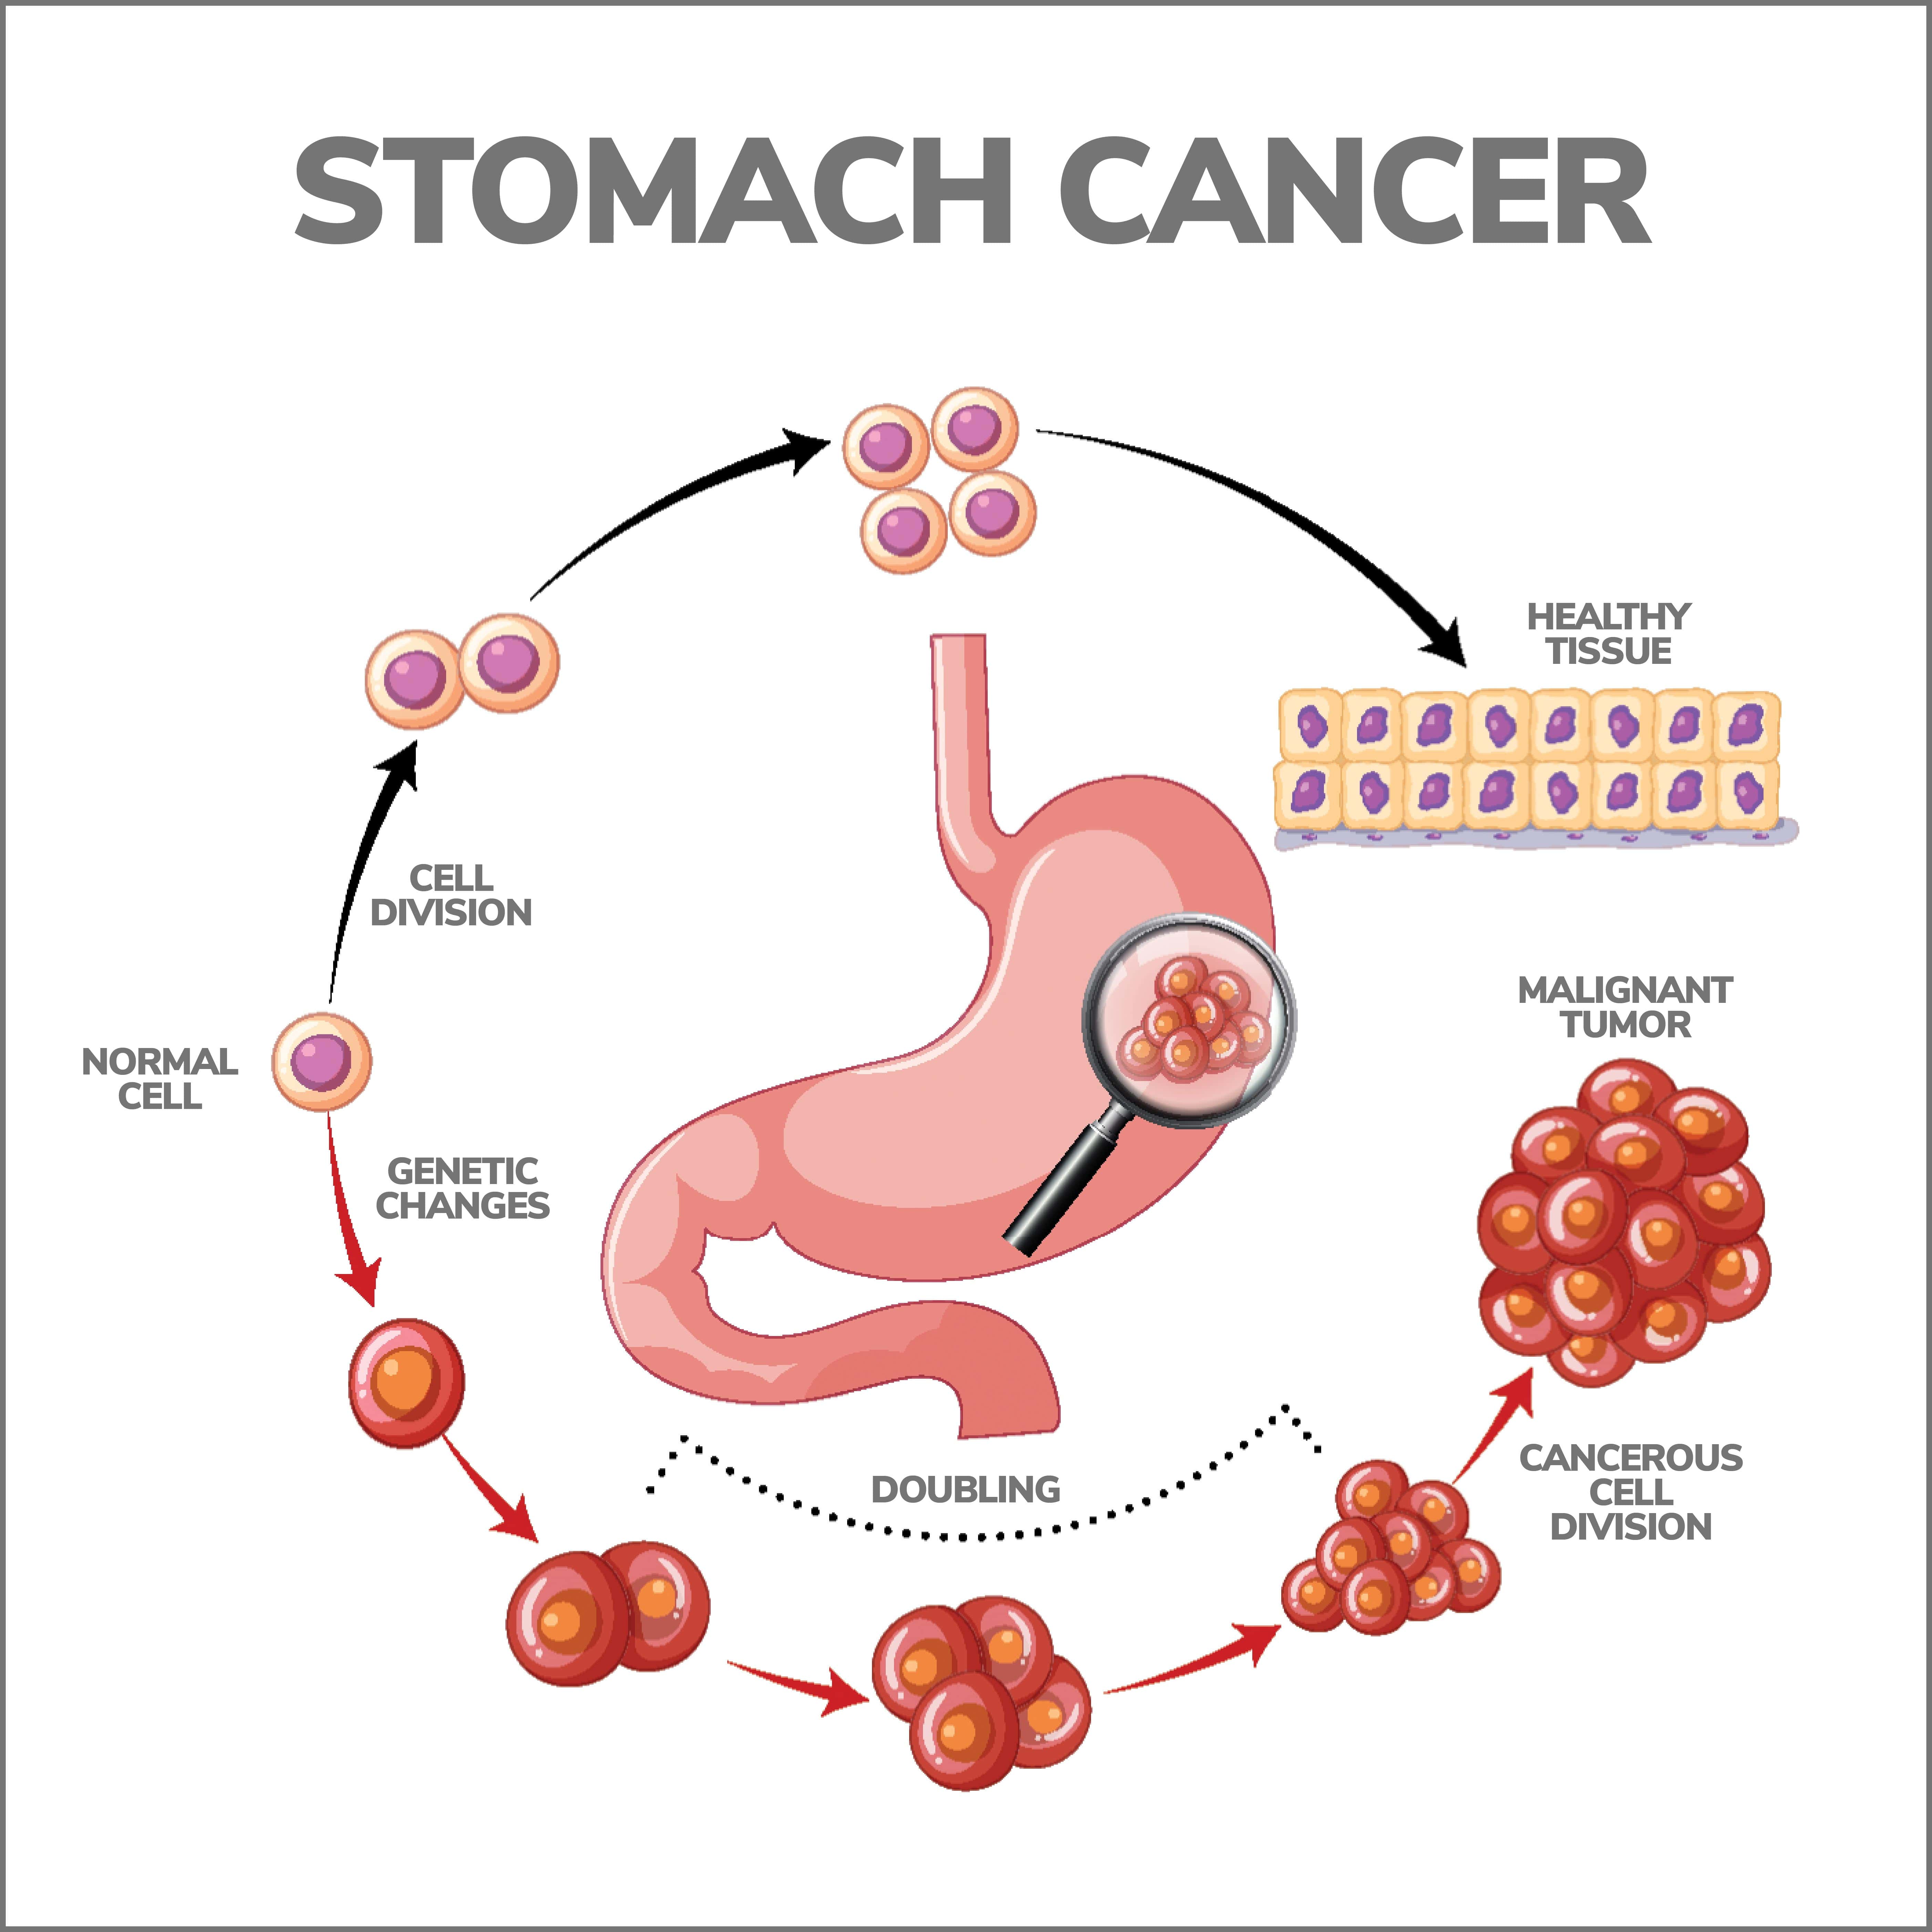 How Fast Does The Progression of Stomach Cancer Spread?